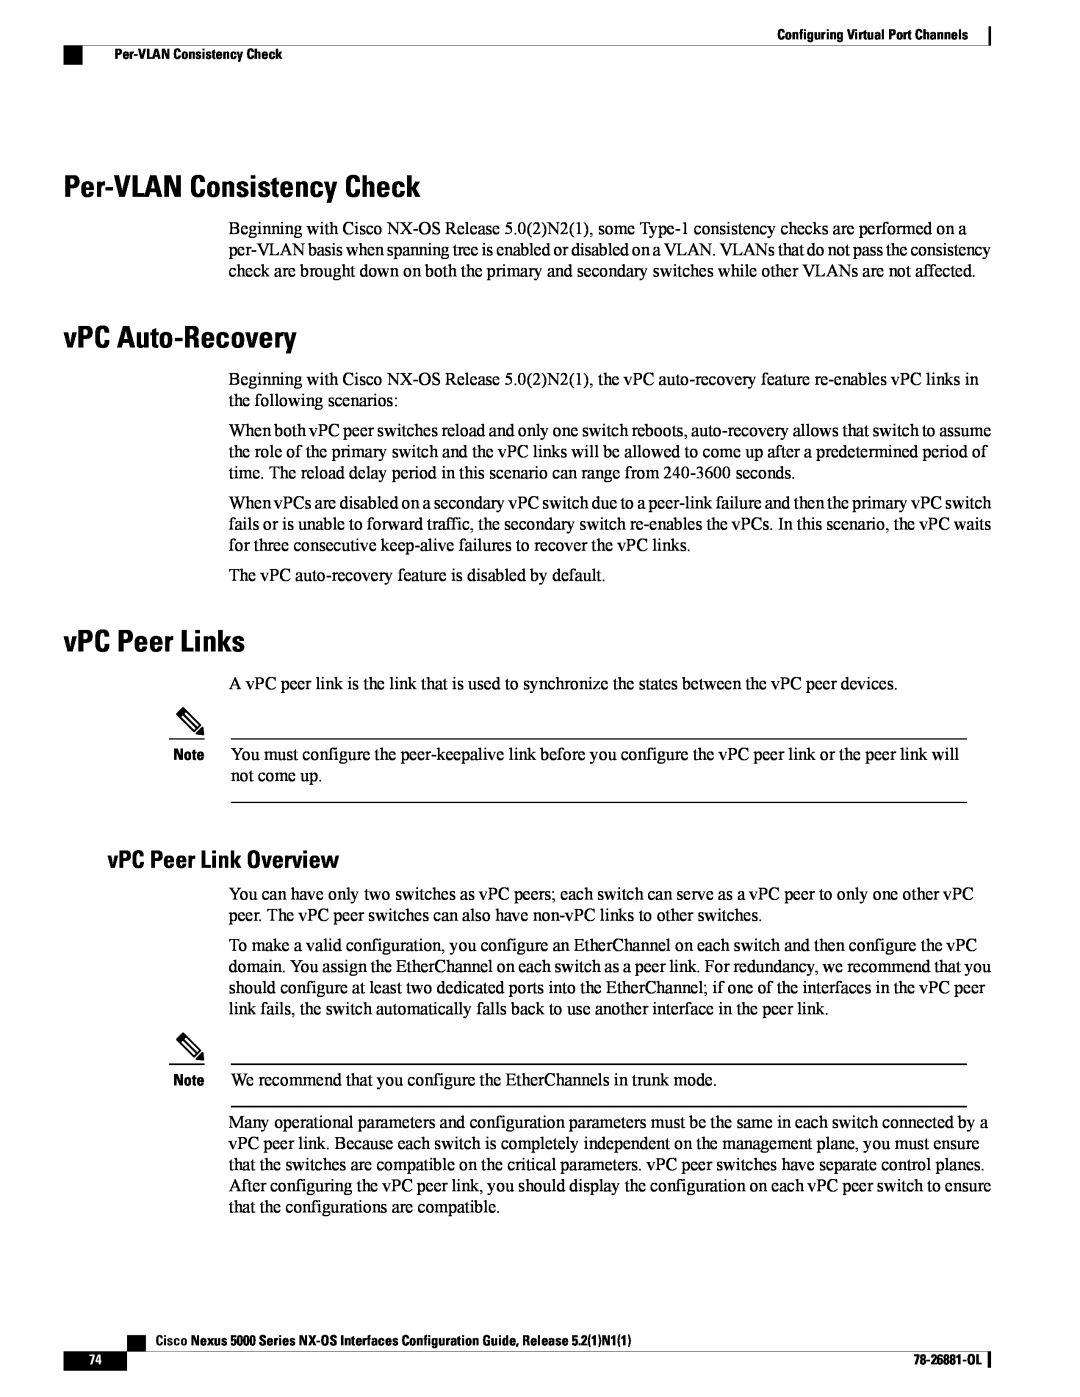 Cisco Systems N5KC5596TFA manual Per-VLAN Consistency Check, vPC Auto-Recovery, vPC Peer Links, vPC Peer Link Overview 